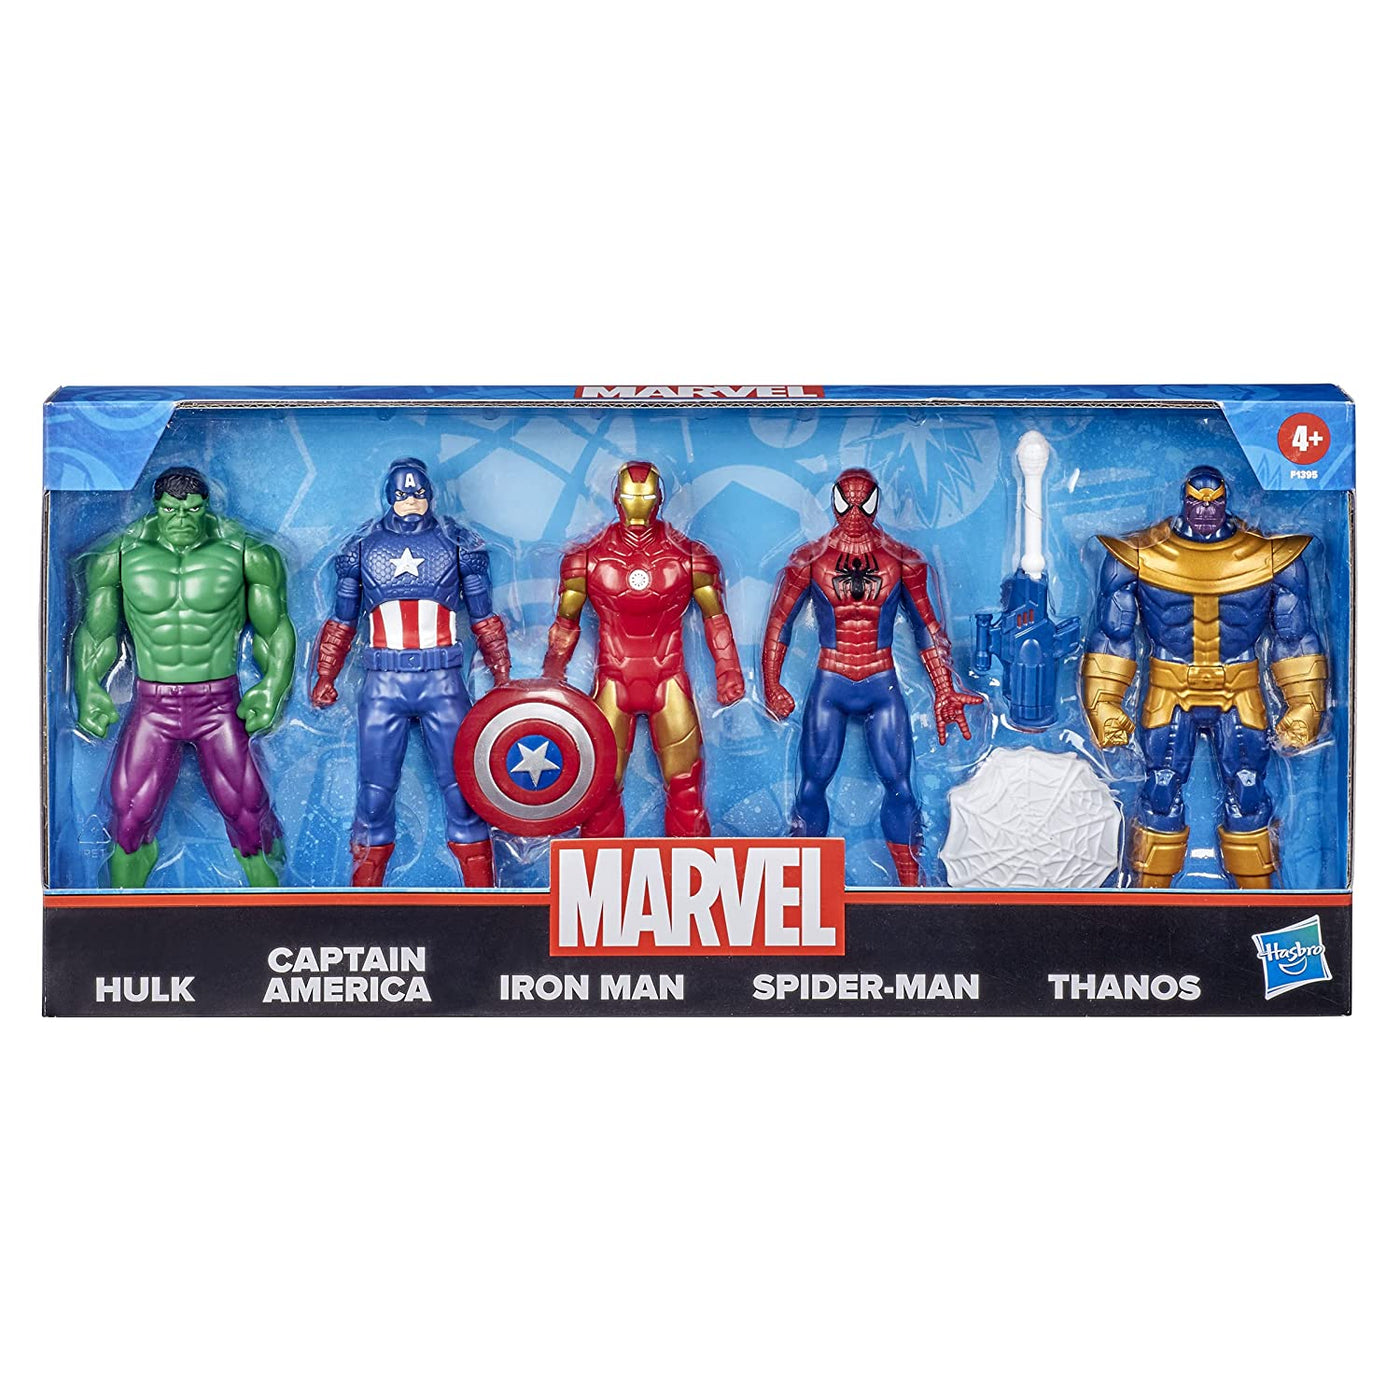 Marvel Super Heroes: Action Figure 5-Pack - 6-Inch | Hasbro